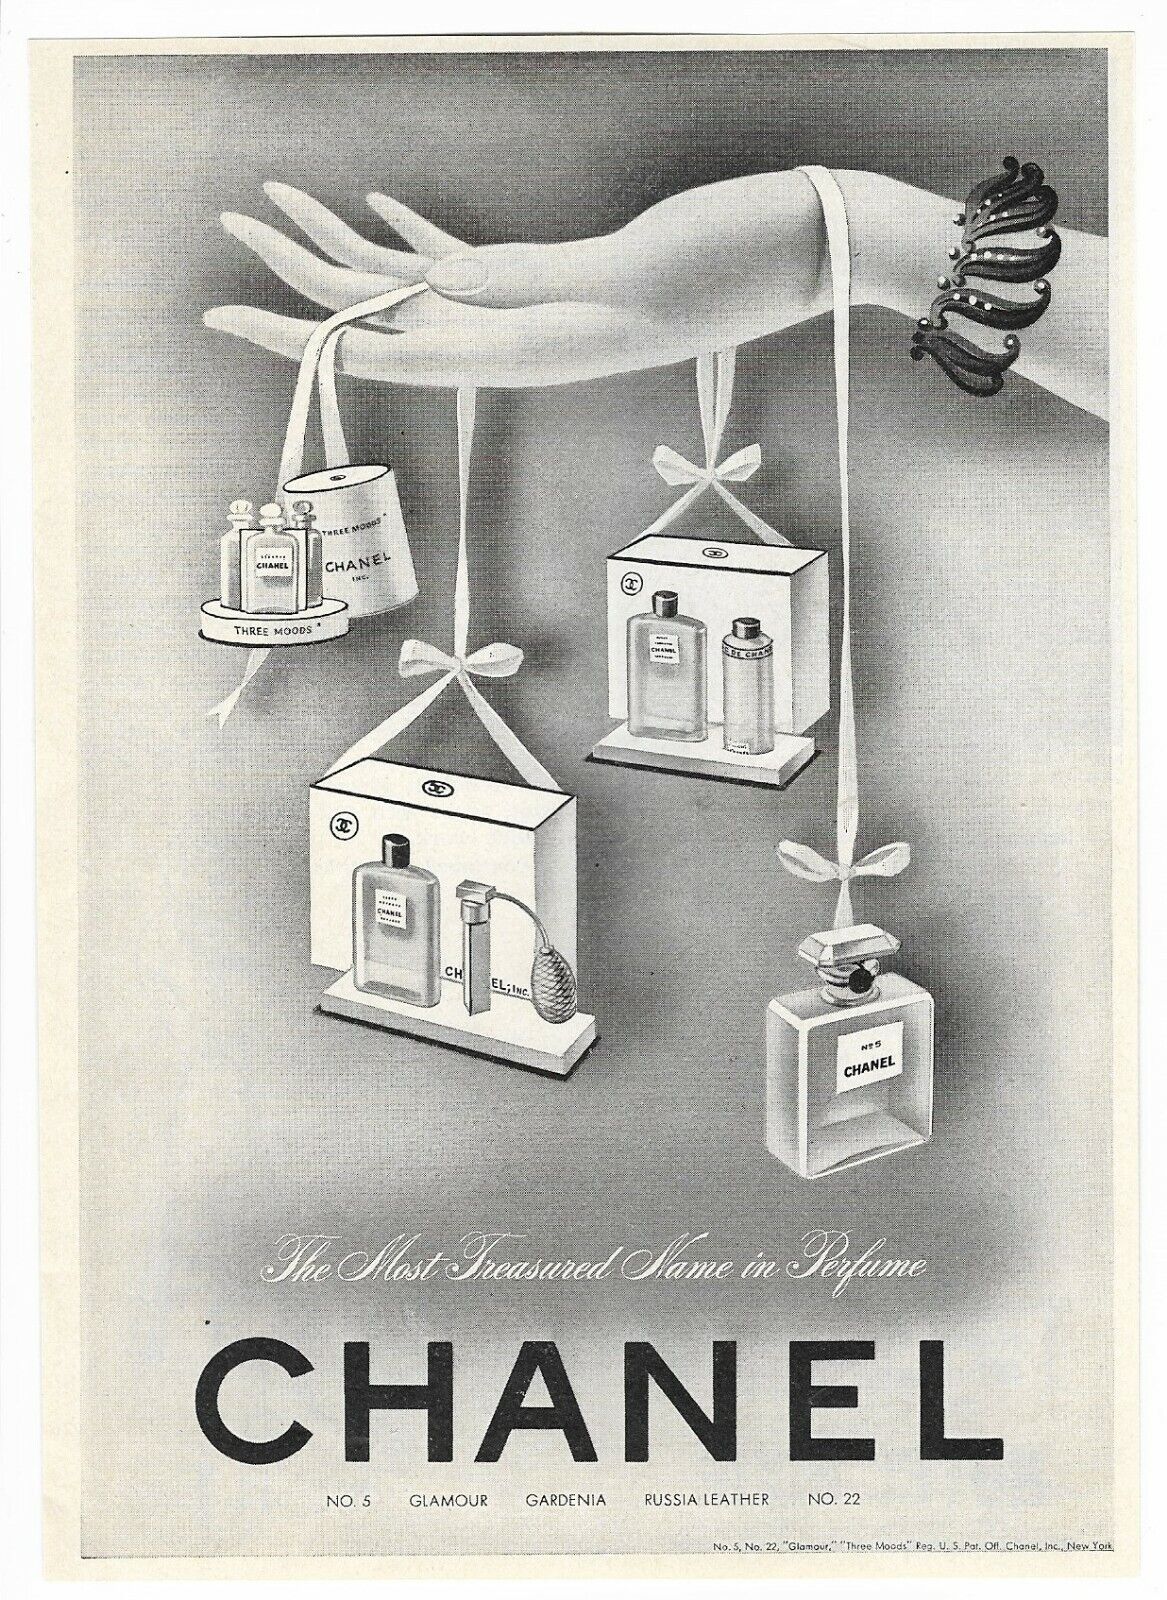 Vintage 1940's Women's Perfume Beauty - Chanel Product Line Wwii - 1943 Art Ad